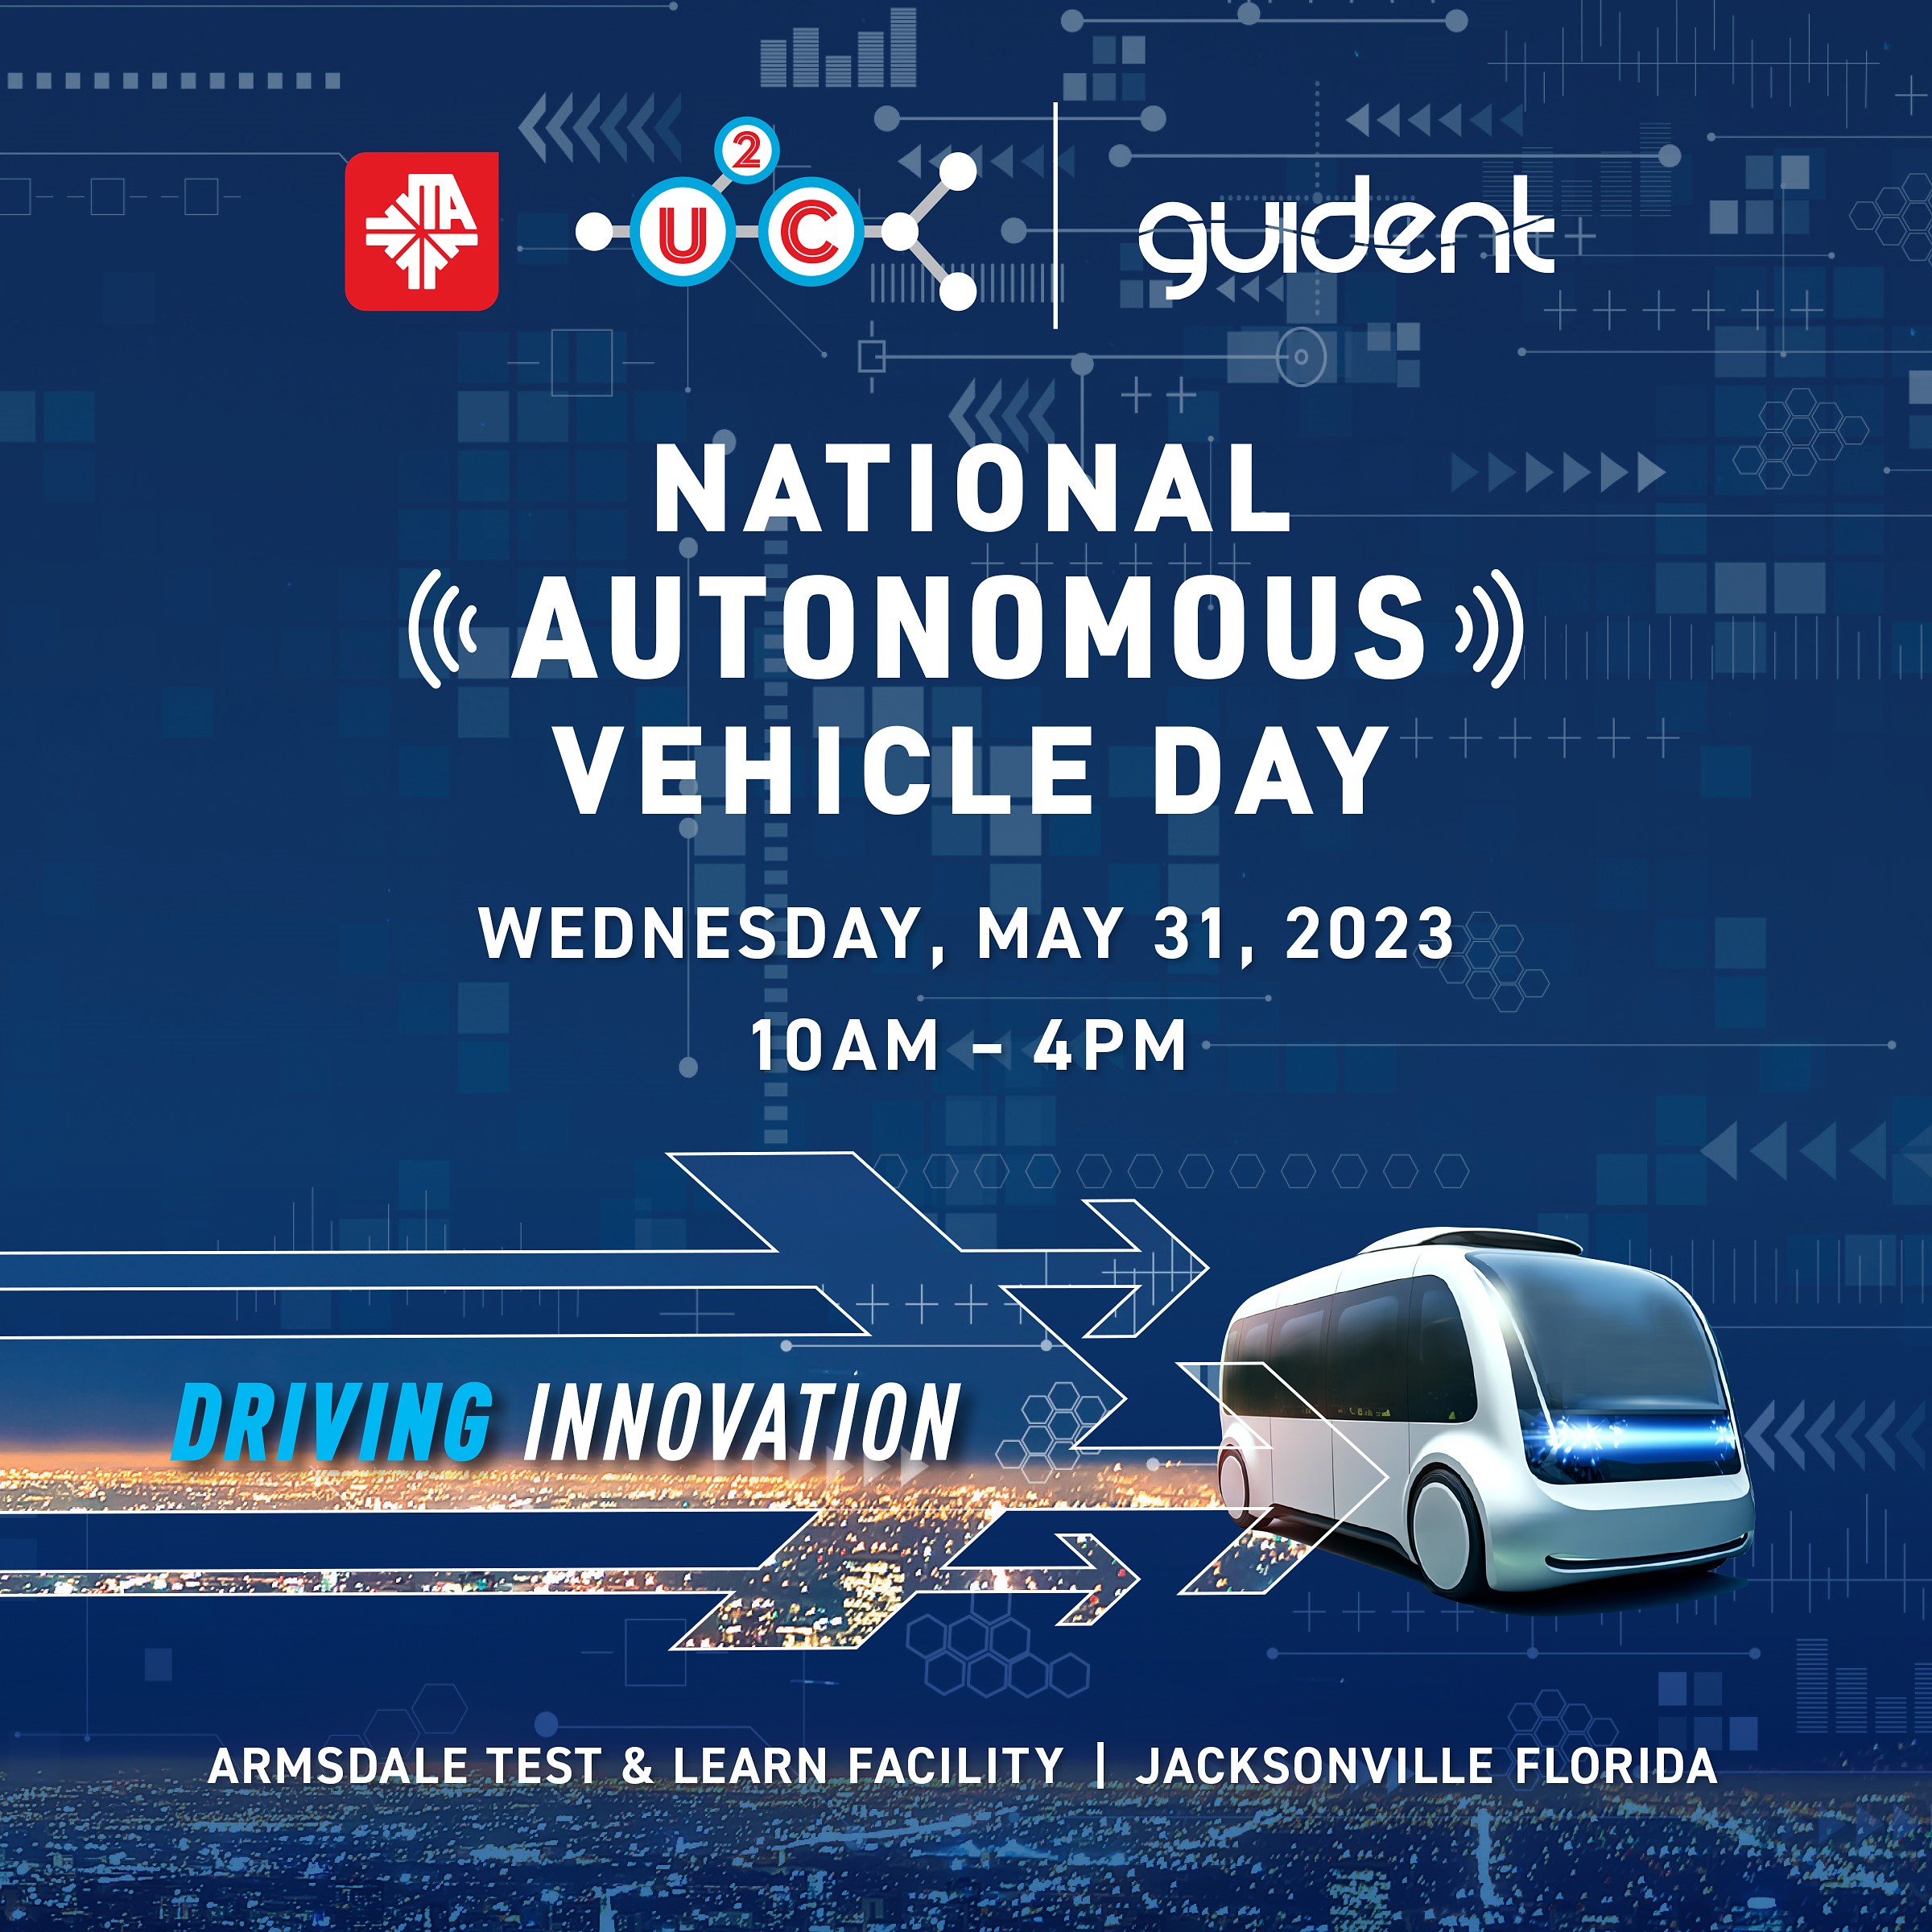 JTA, Guident to Host National Autonomous Vehicle Day Event